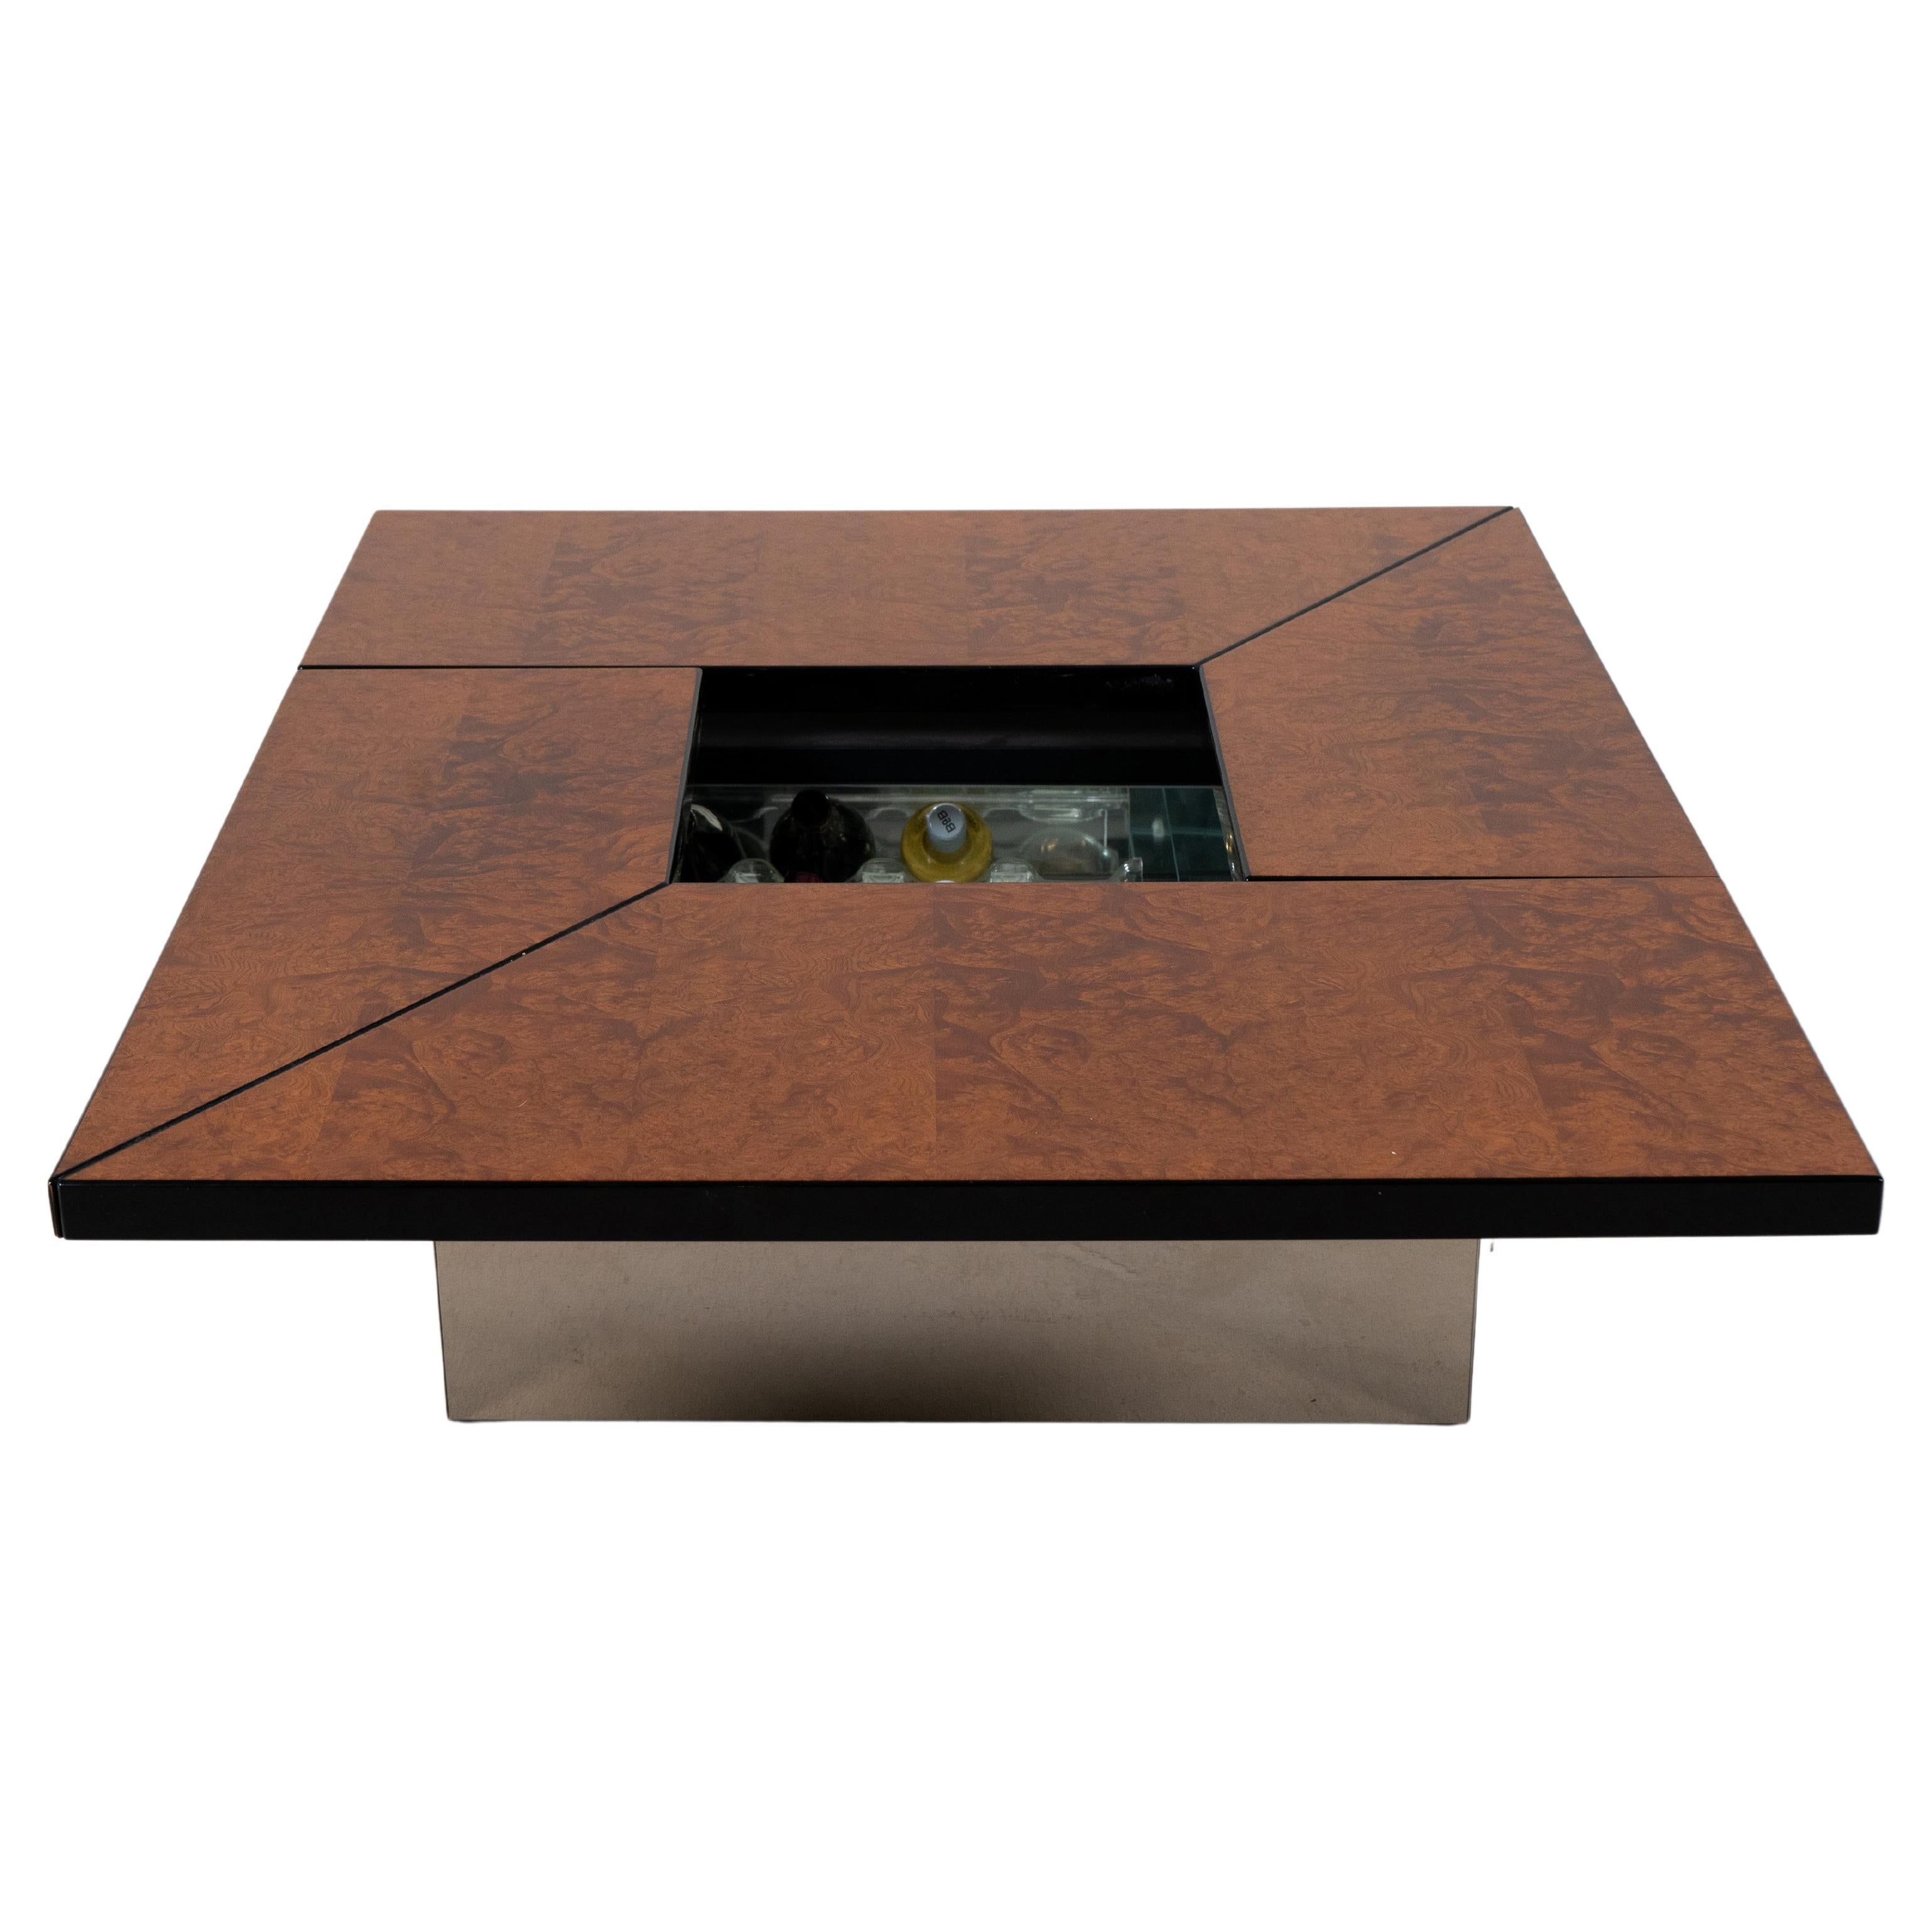 A Burl Wood Sliding Coffee Table or Bar by Paul Michel, Belgium c.1970 For Sale